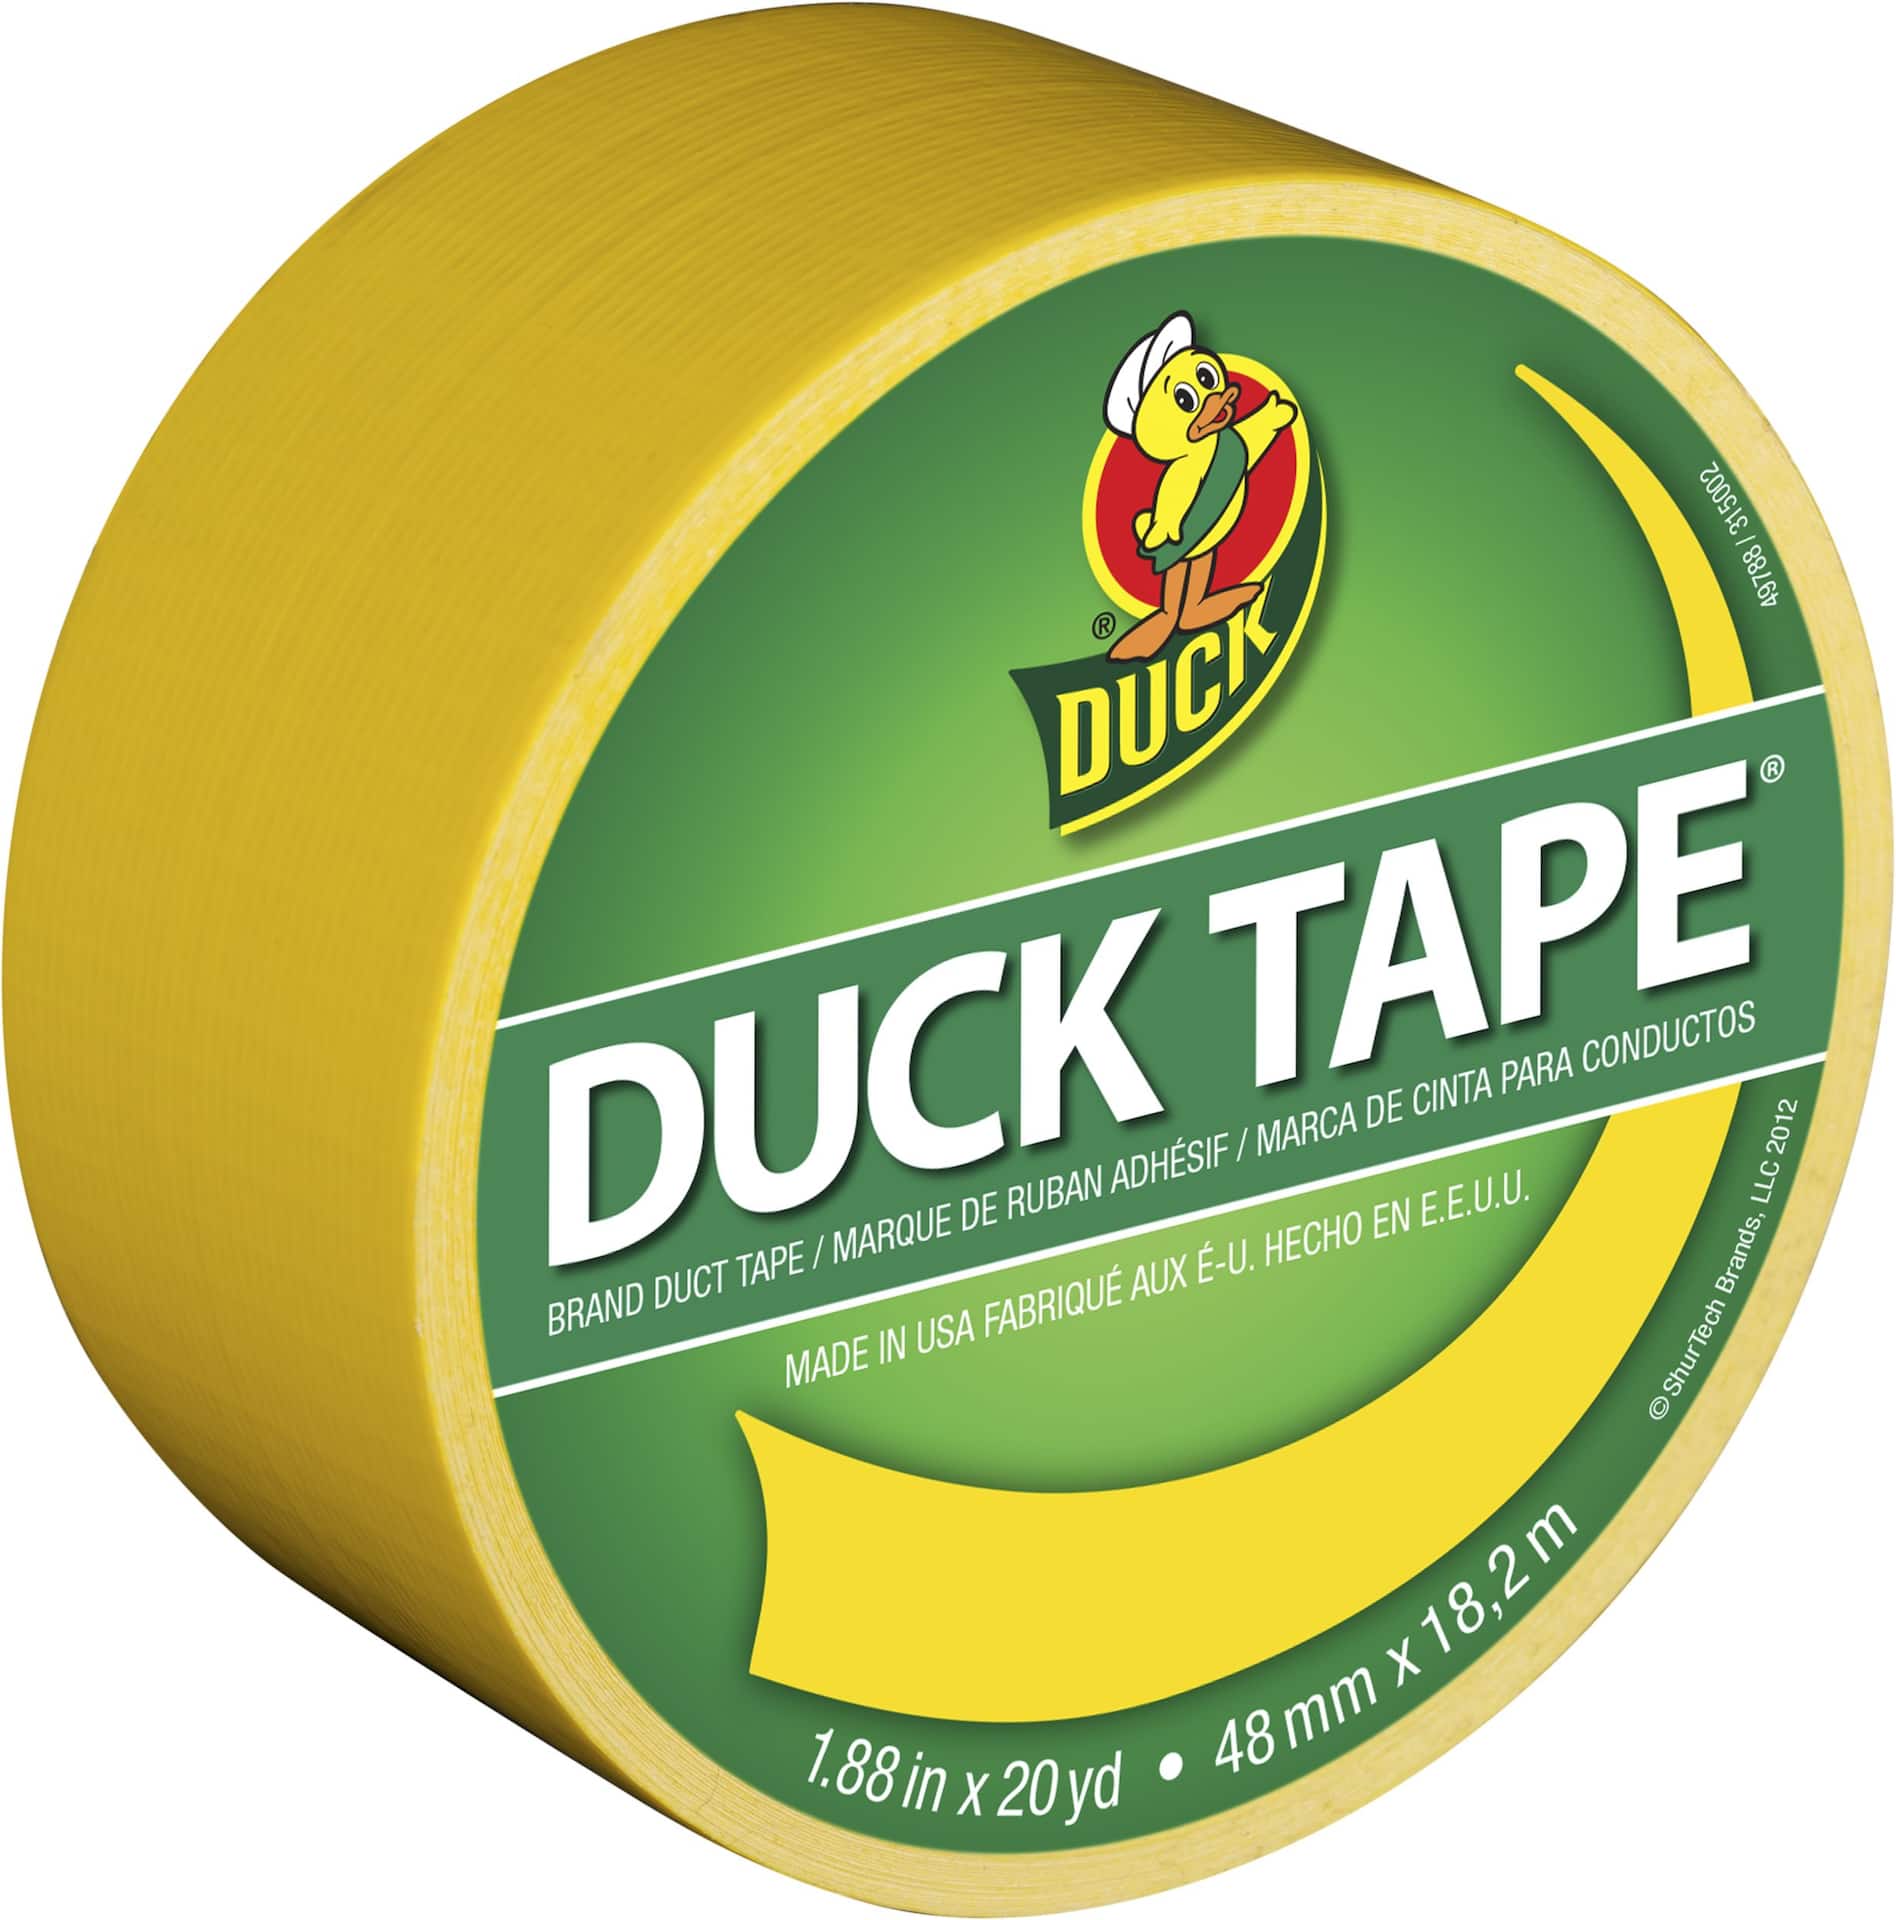 https://media-www.canadiantire.ca/product/fixing/paint/surface-prep-maintenance/0676169/yellow-duck-tape-e5bbd0b1-9721-42a4-98c3-45f102dd91d0-jpgrendition.jpg